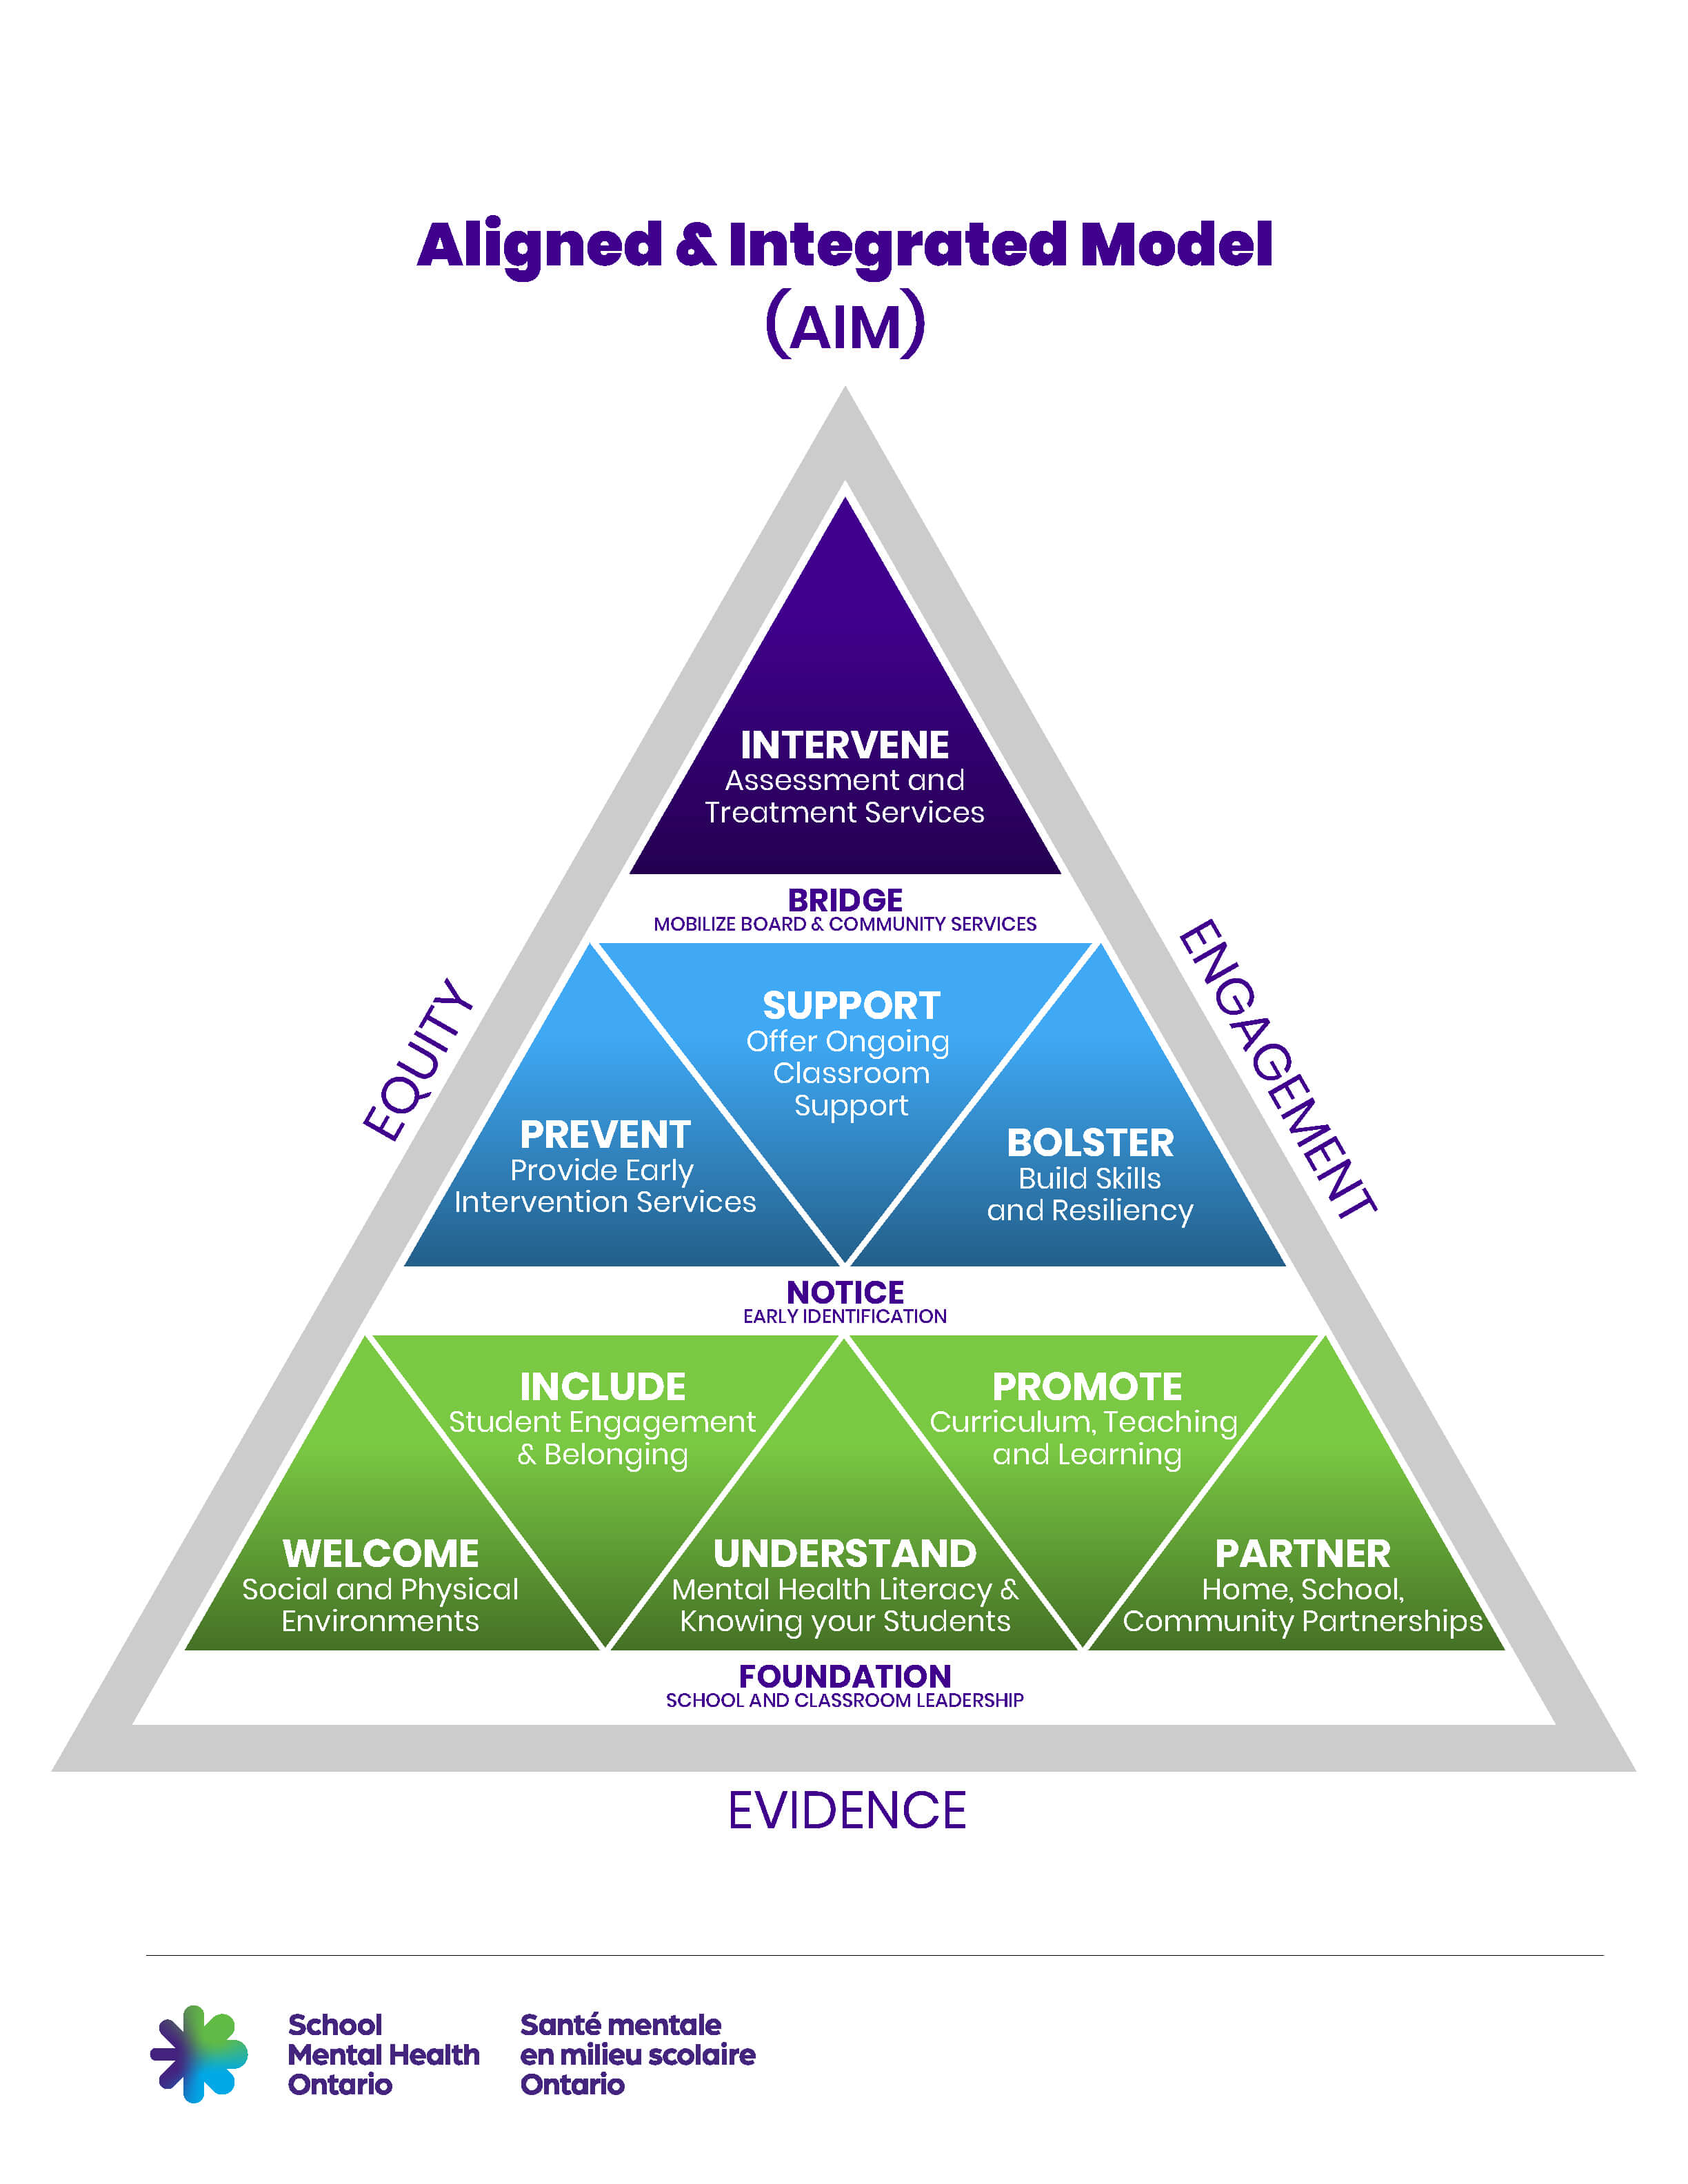 The Aligned and Integrated Model or AIM is a triangle that shows the three tiers of student mental health support in Ontario. A full description can be found in the next section.